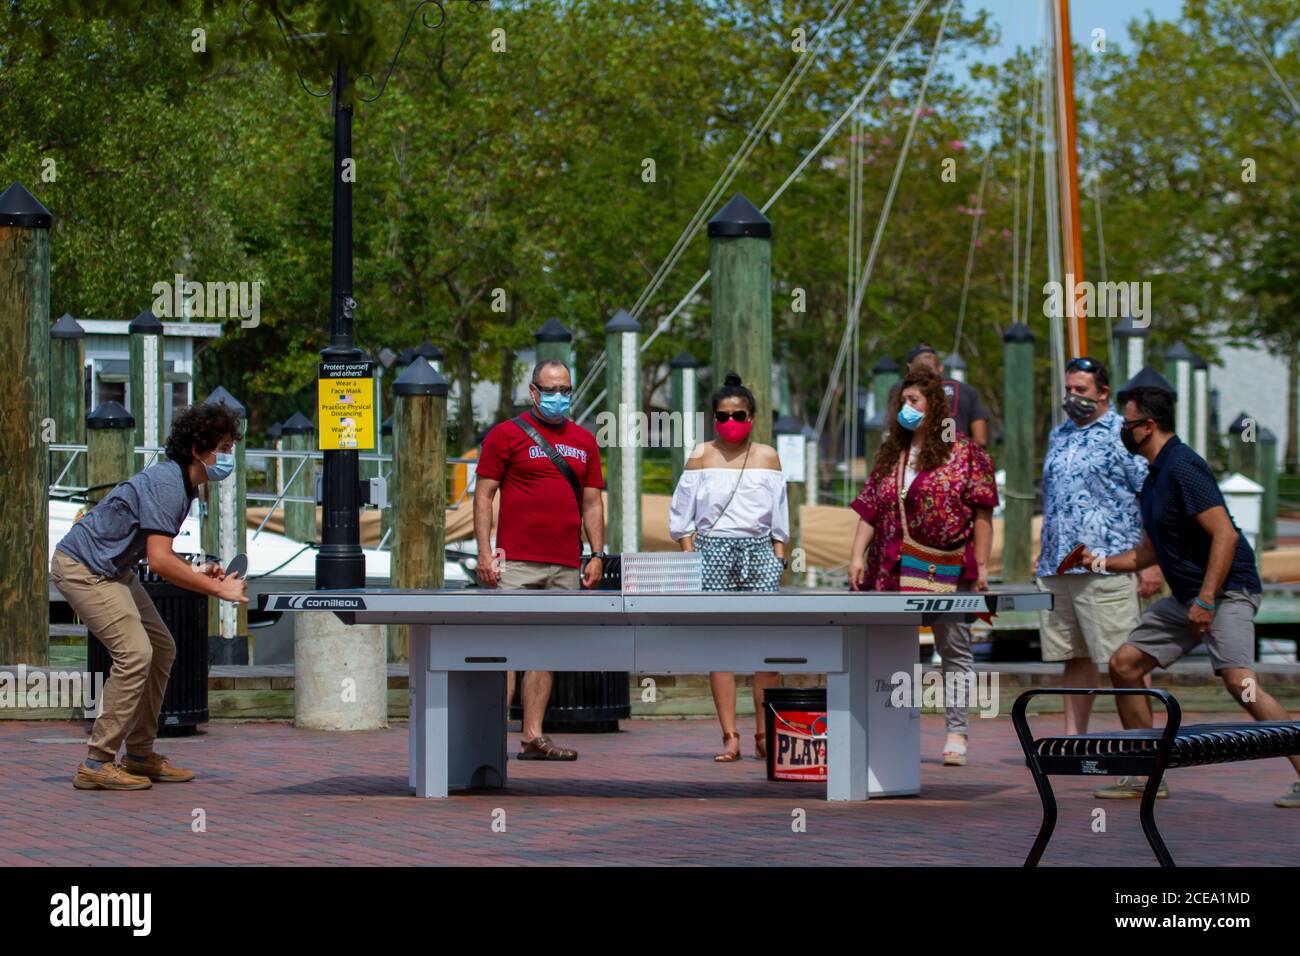 Annapolis, MD 08/21/2020: Two men are playing ping pong (table tennis) in the park area near Annapolis Marina. They have spectators watching the game. Stock Photo